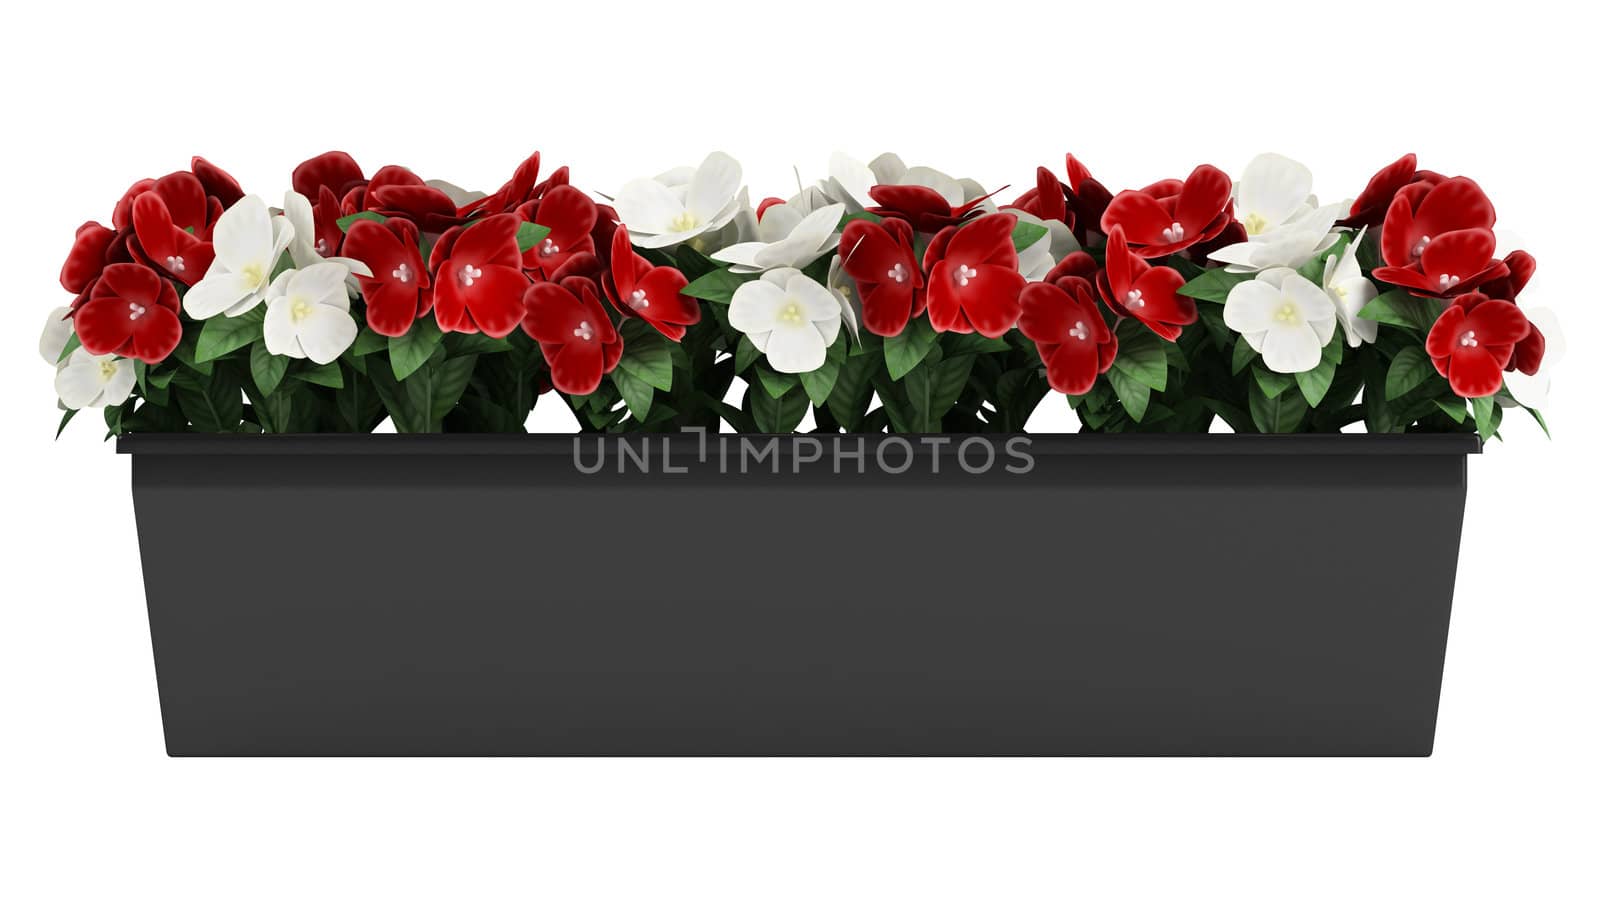 Window box of colourful red and white Madagascan Periwinkle flowers isolated on white